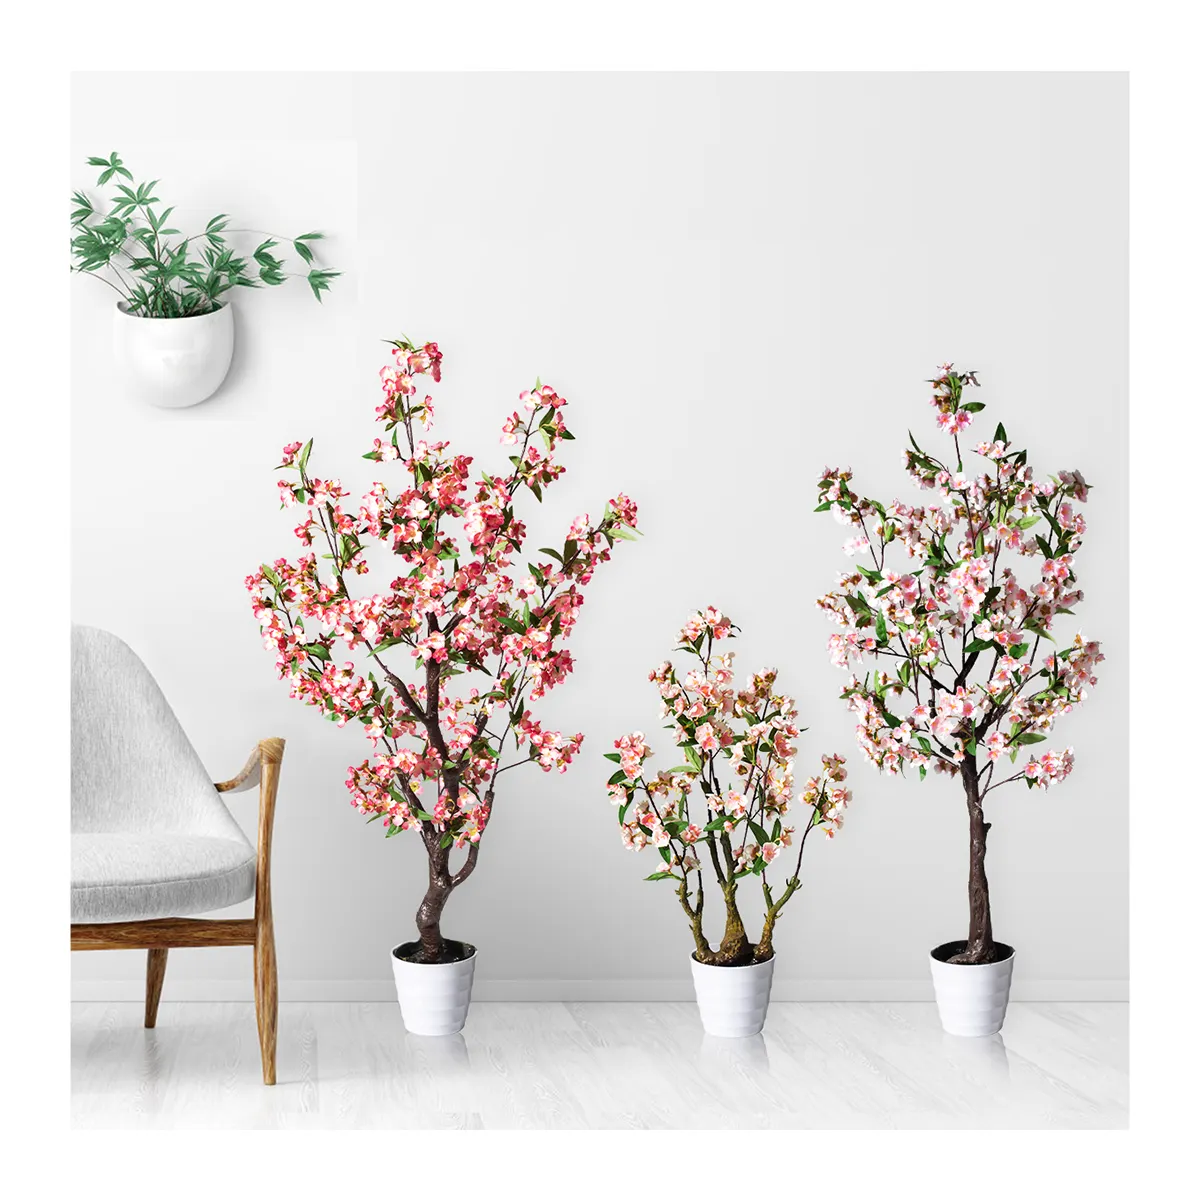 PZ-4-79/PZ-4-80/PZ-4-81 Vertical Garden Real Touch Silk Potted Plant Artificial Pink Flower Tree for House Living Room Decor